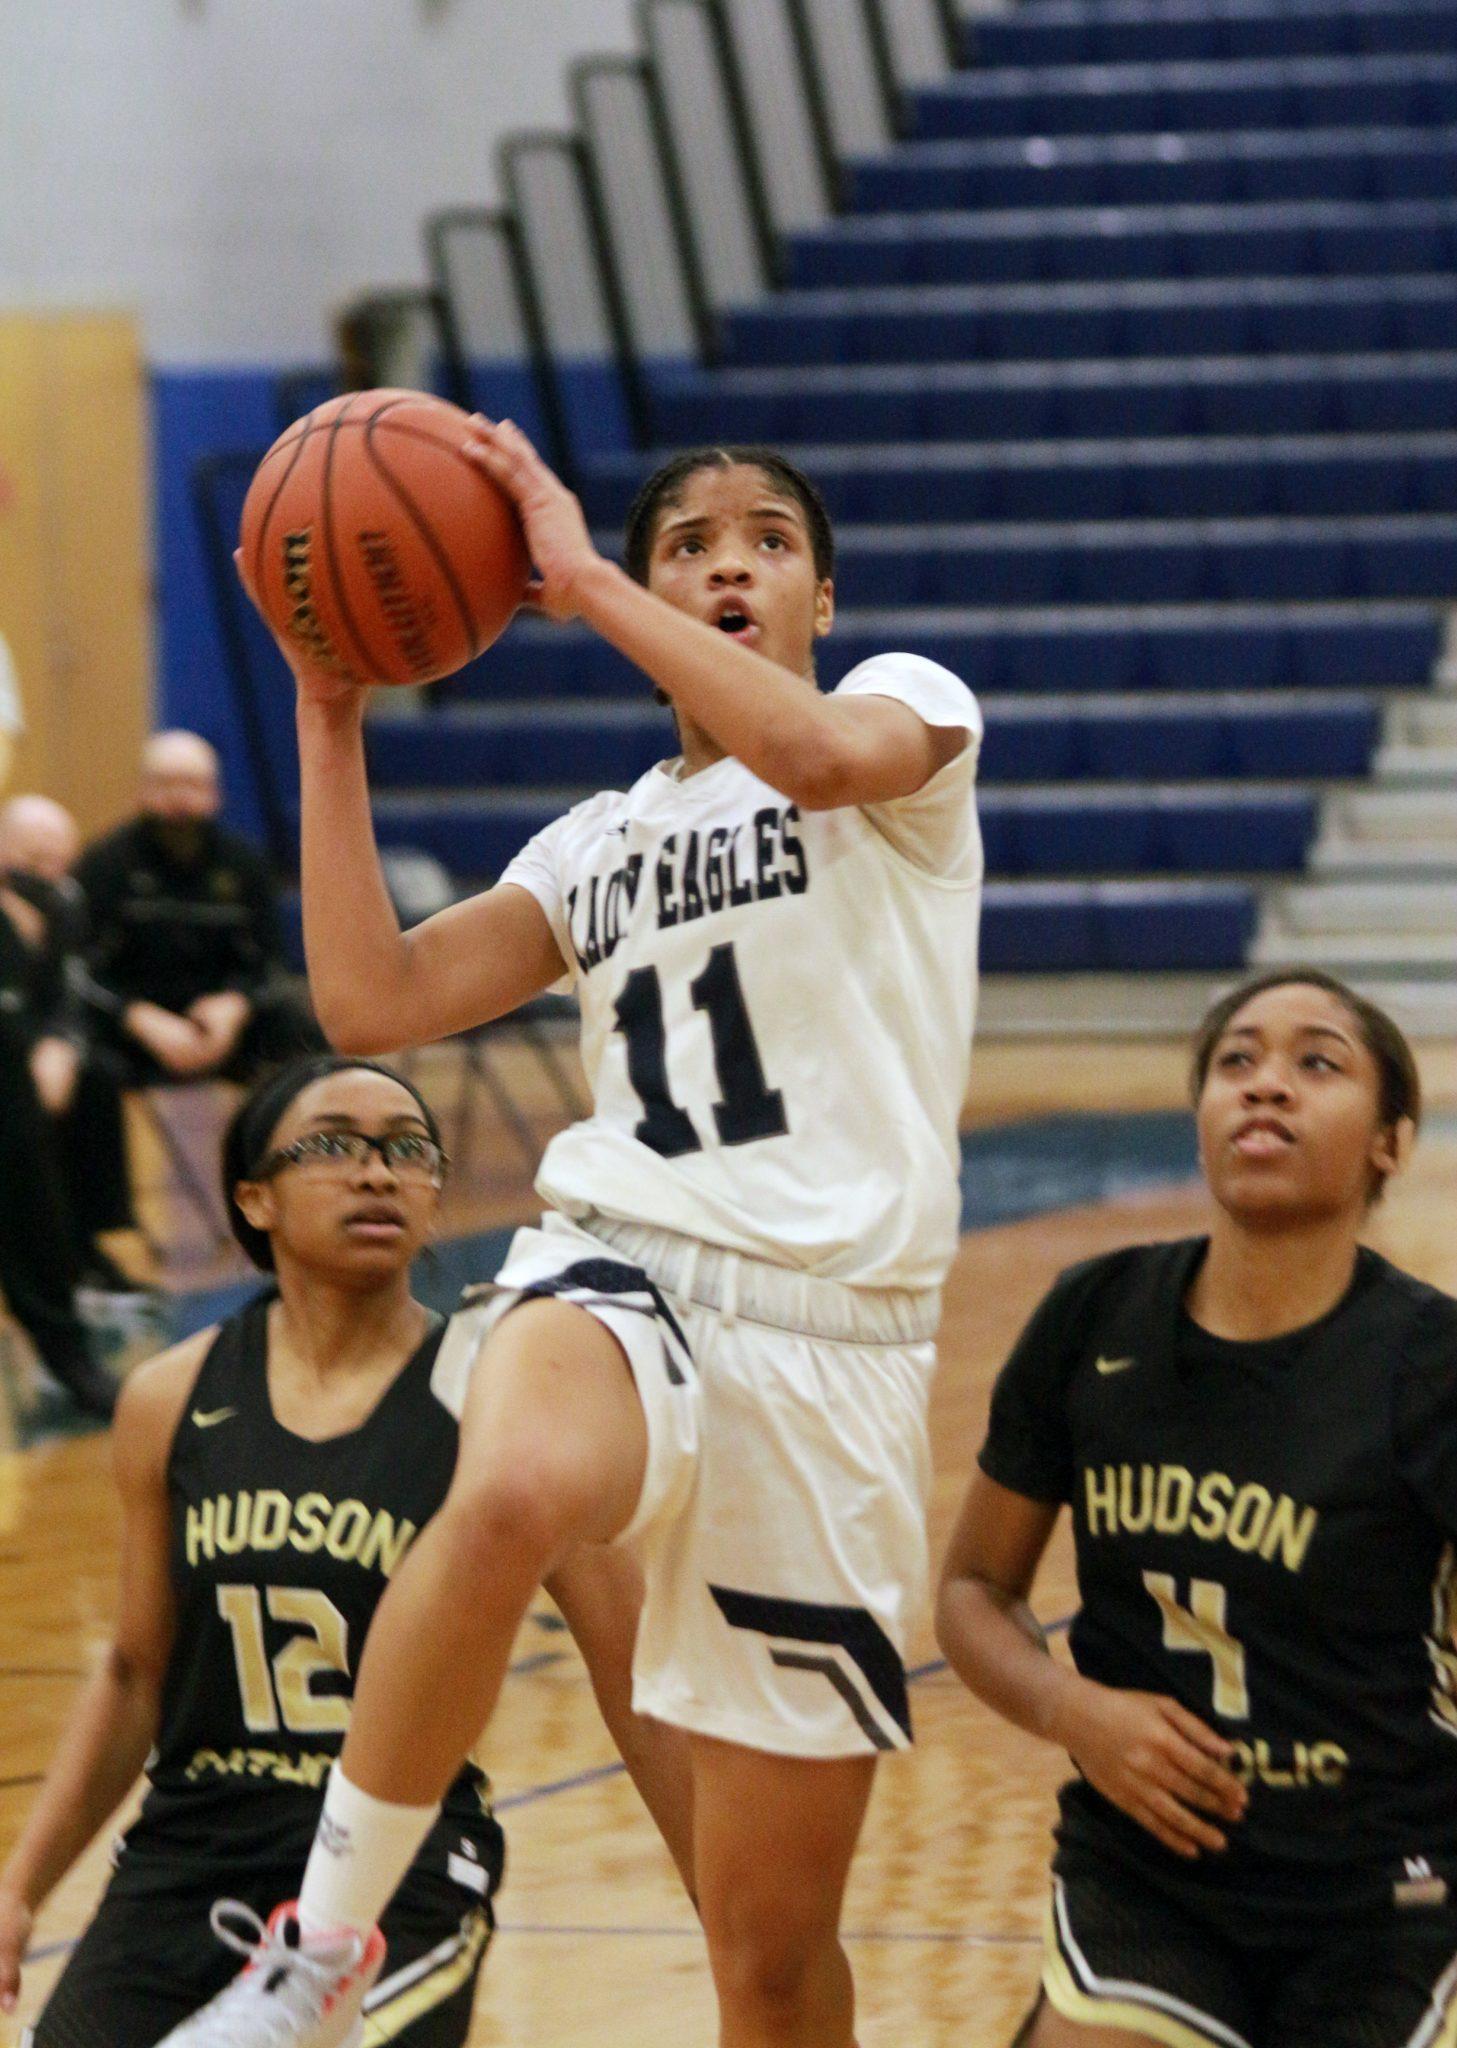 Union City High School Basketball Star Erika Mercedes in action